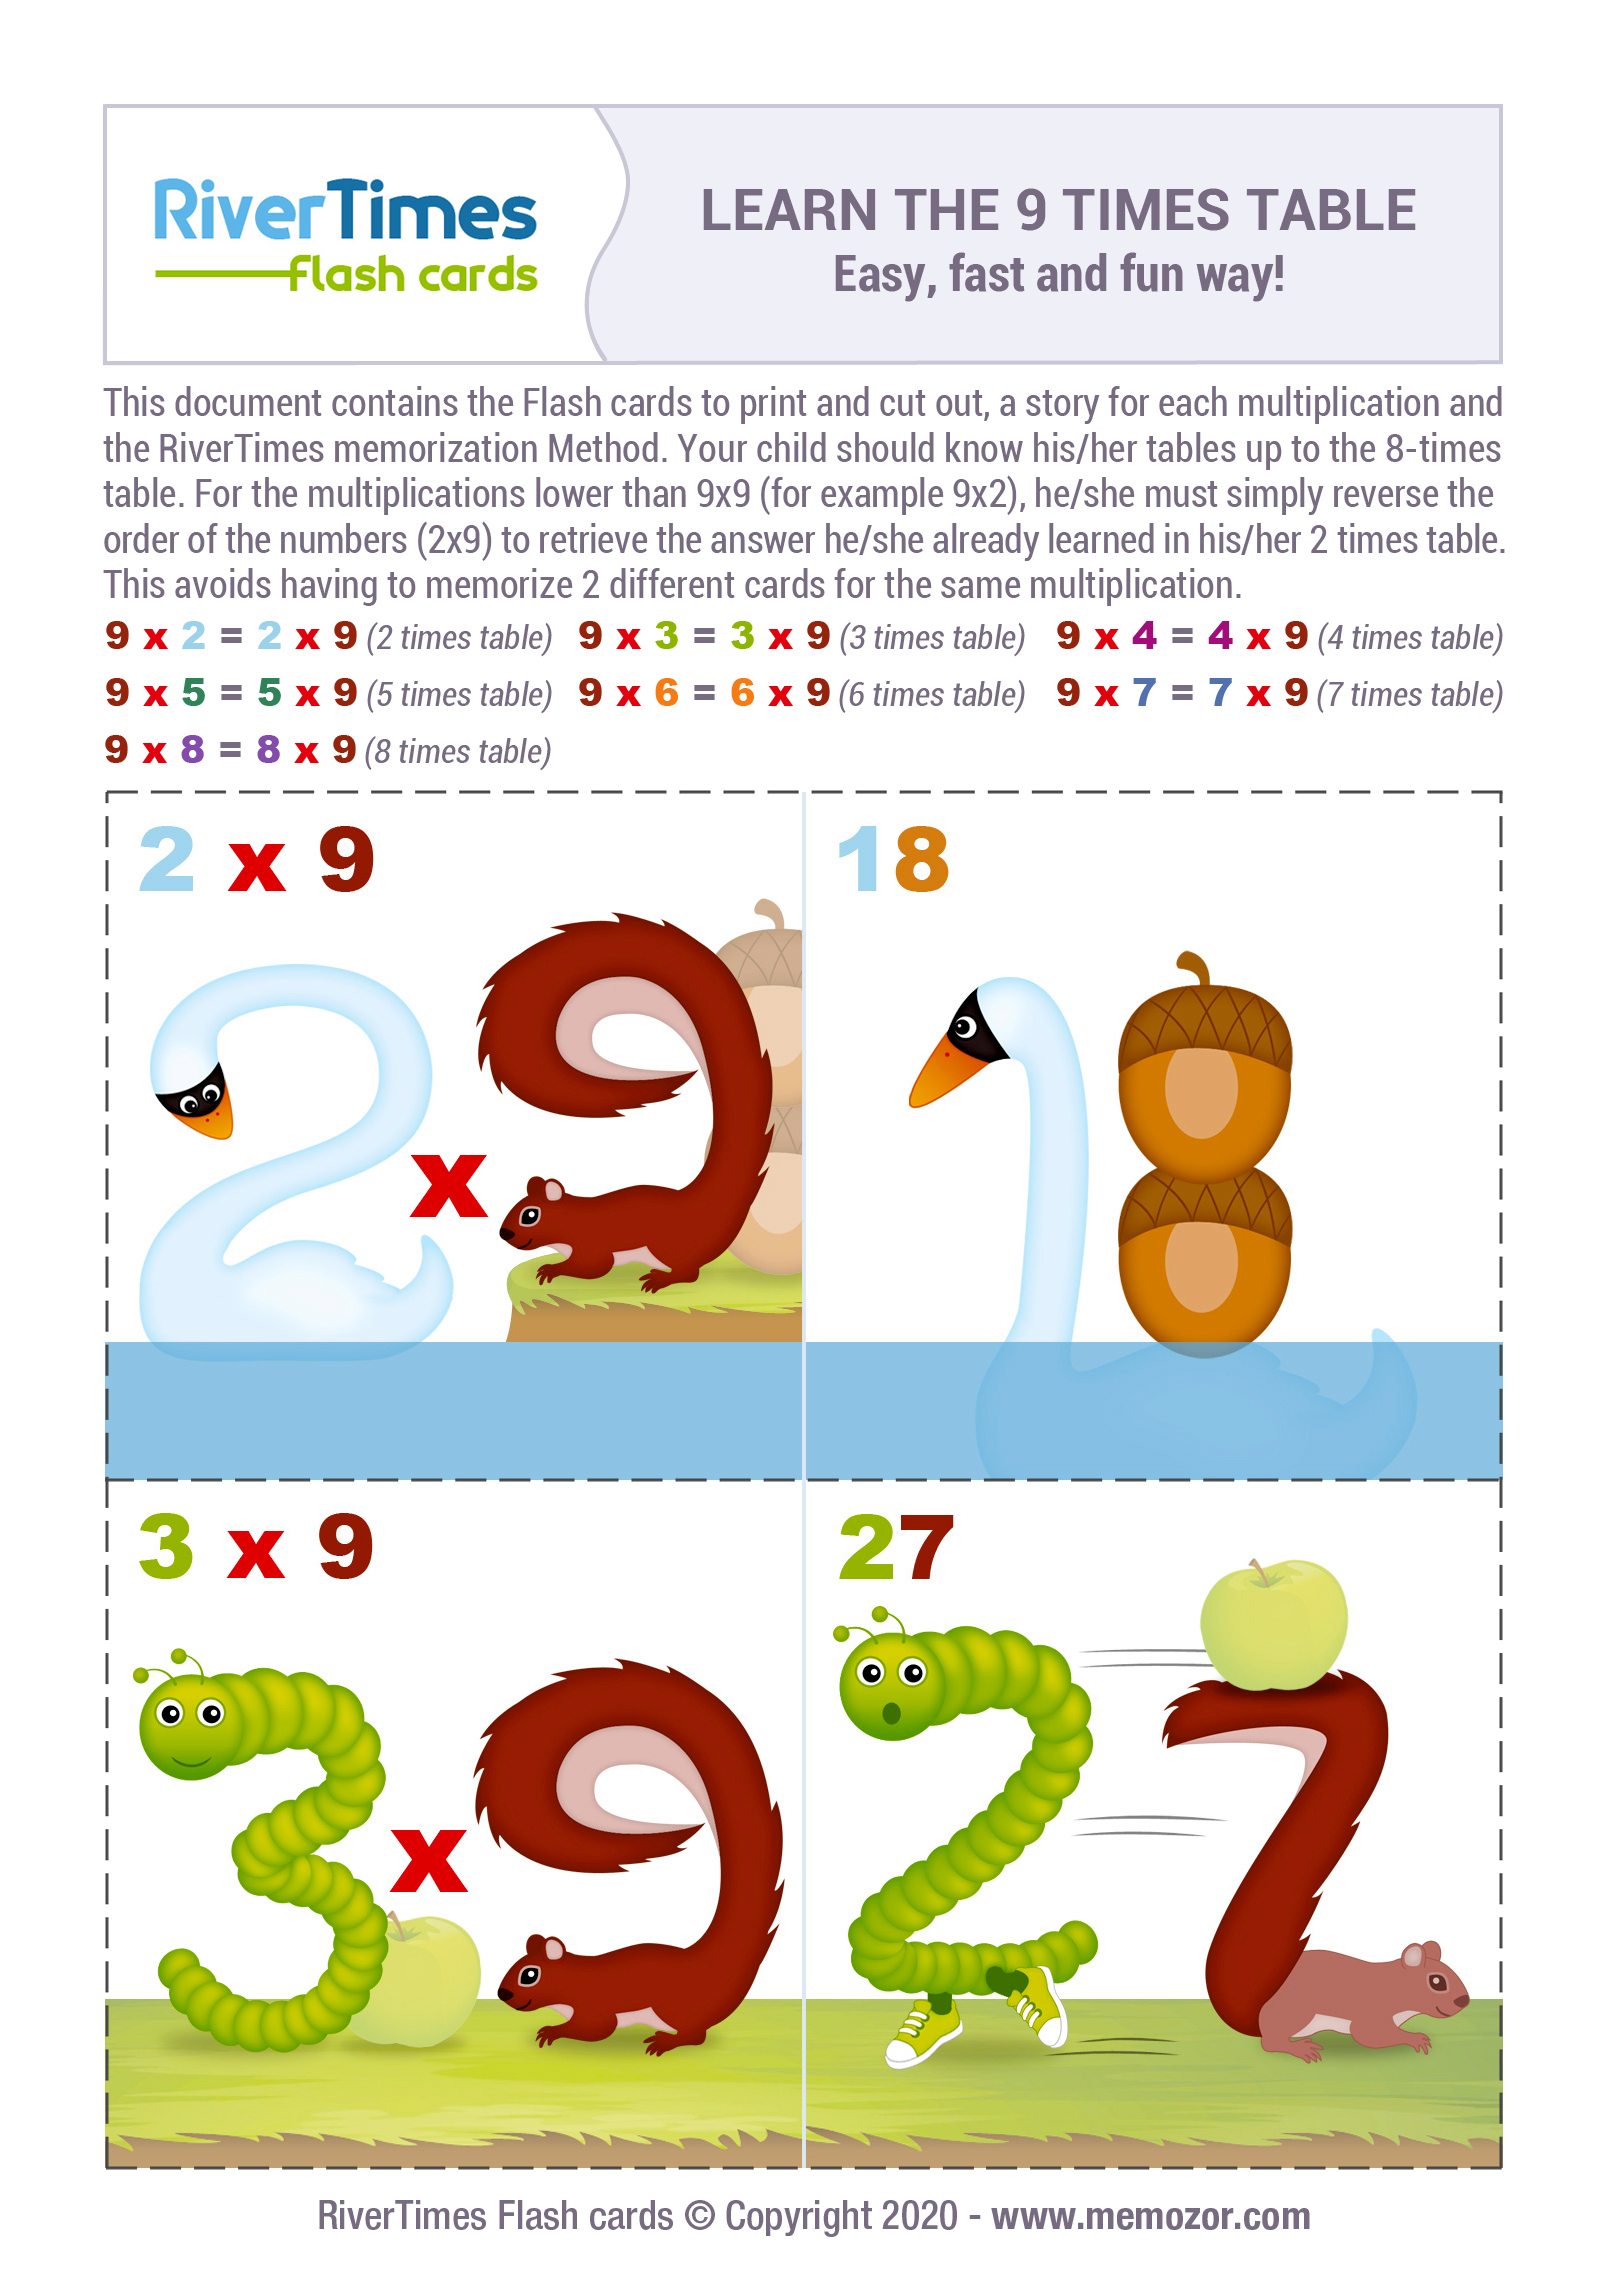 FlashCards 9times table, Print for free Fun way RiverTimes